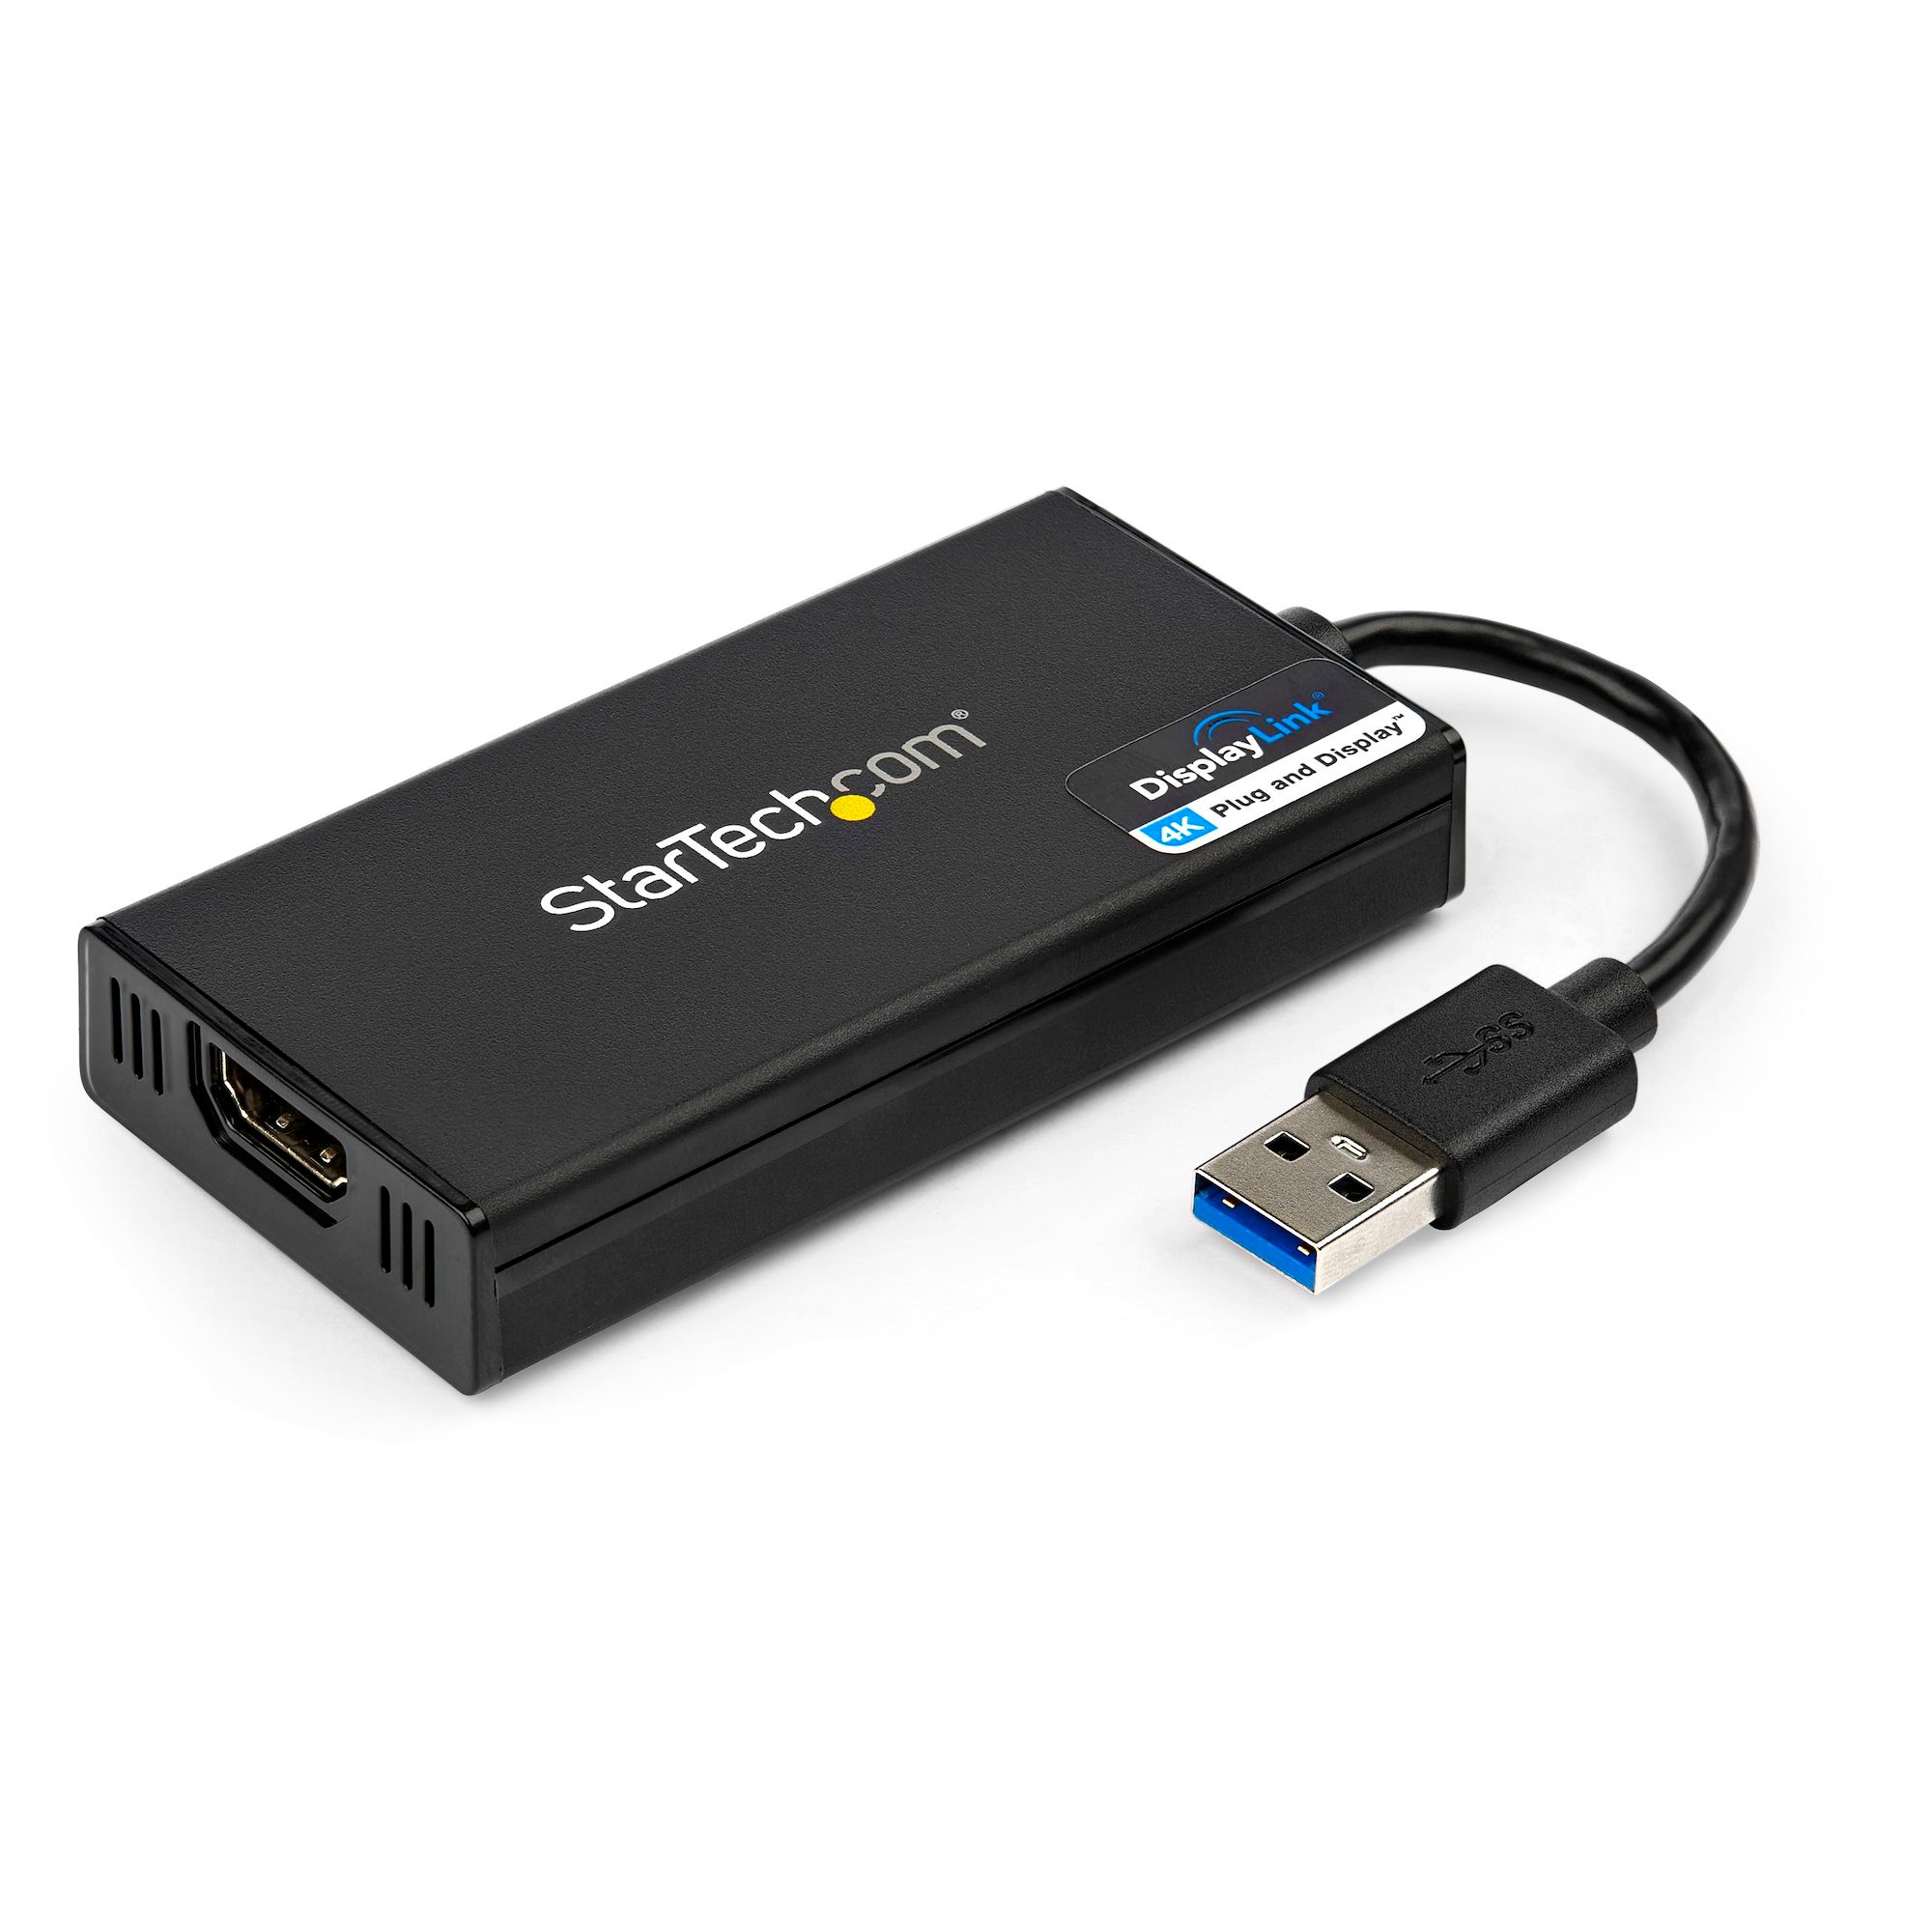 StarTech.com USB 3.0 to HDMI Adapter, 4K 30Hz, DisplayLink Certified, Type-A HDMI Display Adapter Converter, External Graphics Card - USB 3.0 to HDMI adapter supports to 4K 30Hz/5ch audio/1080p -